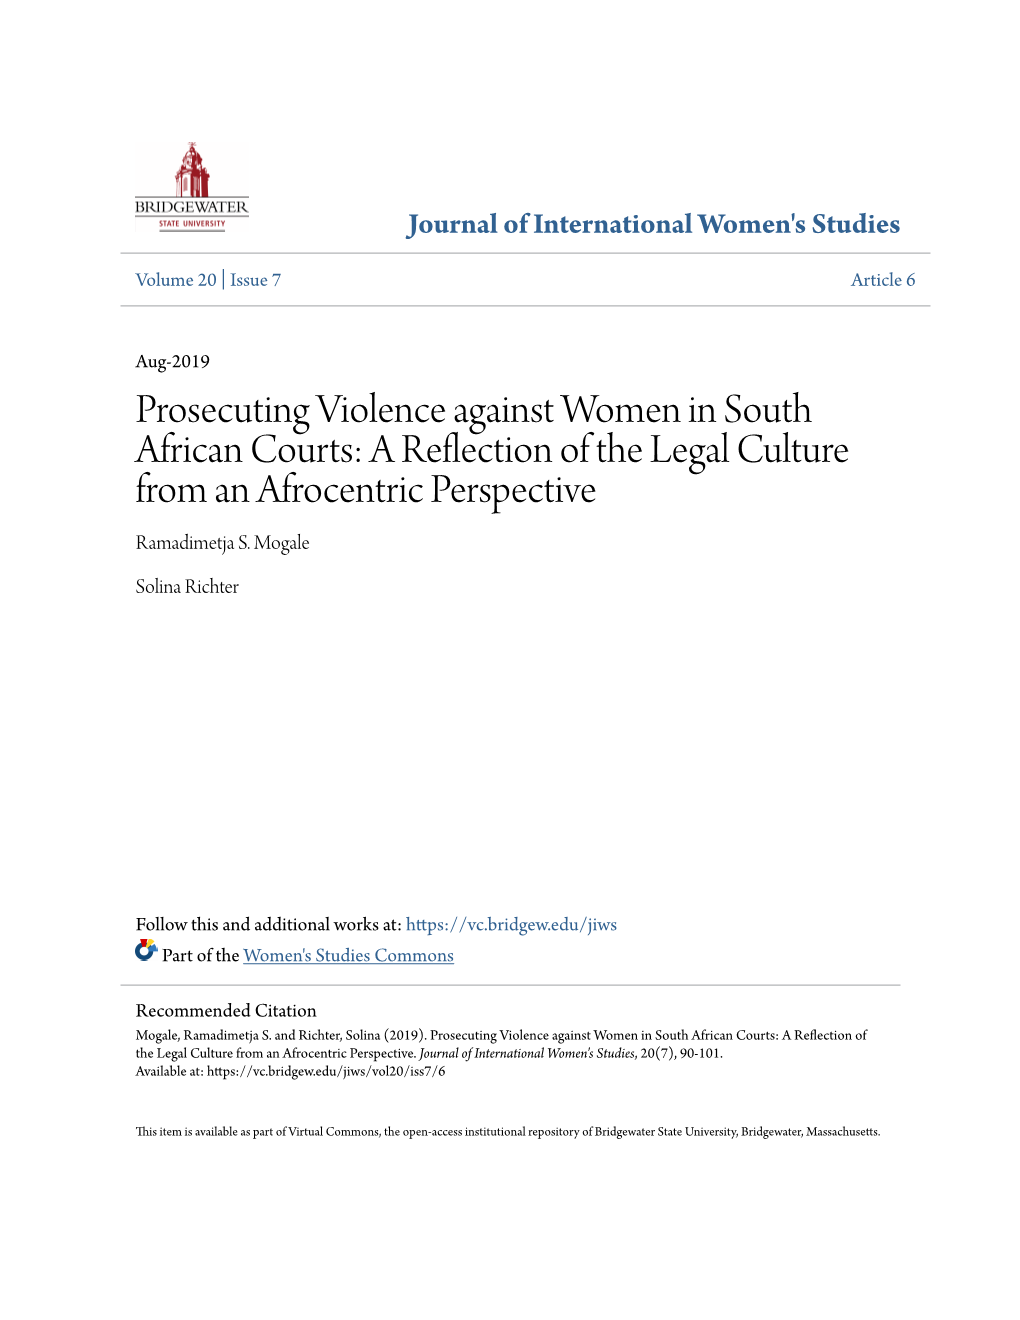 Prosecuting Violence Against Women in South African Courts: a Reflection of the Legal Culture from an Afrocentric Perspective Ramadimetja S